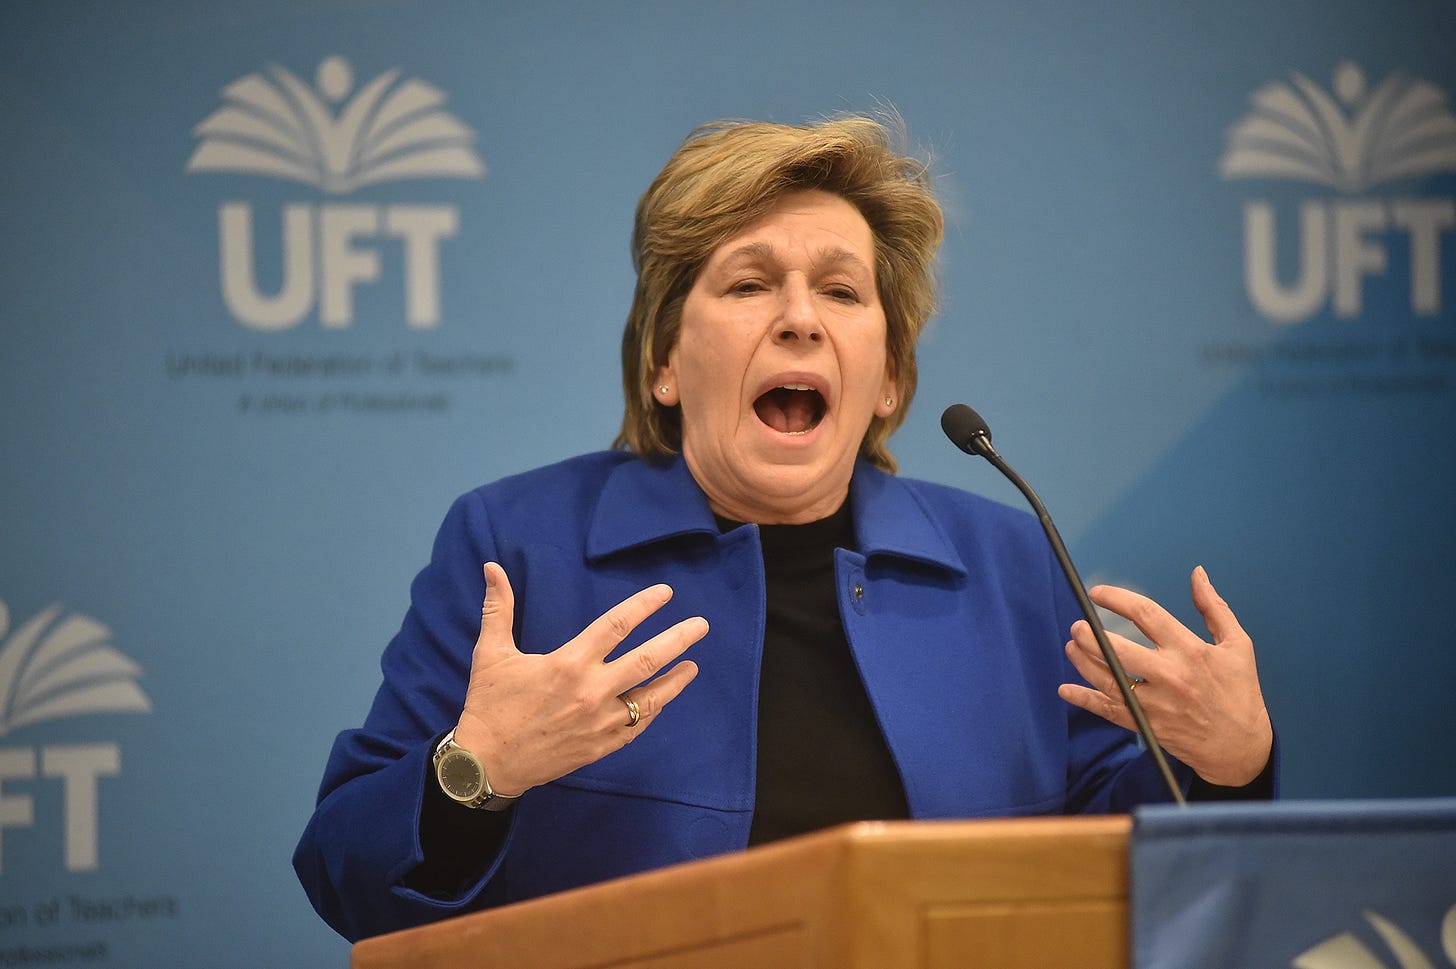 Weingarten's support of 1619 Project betrays union's proud history